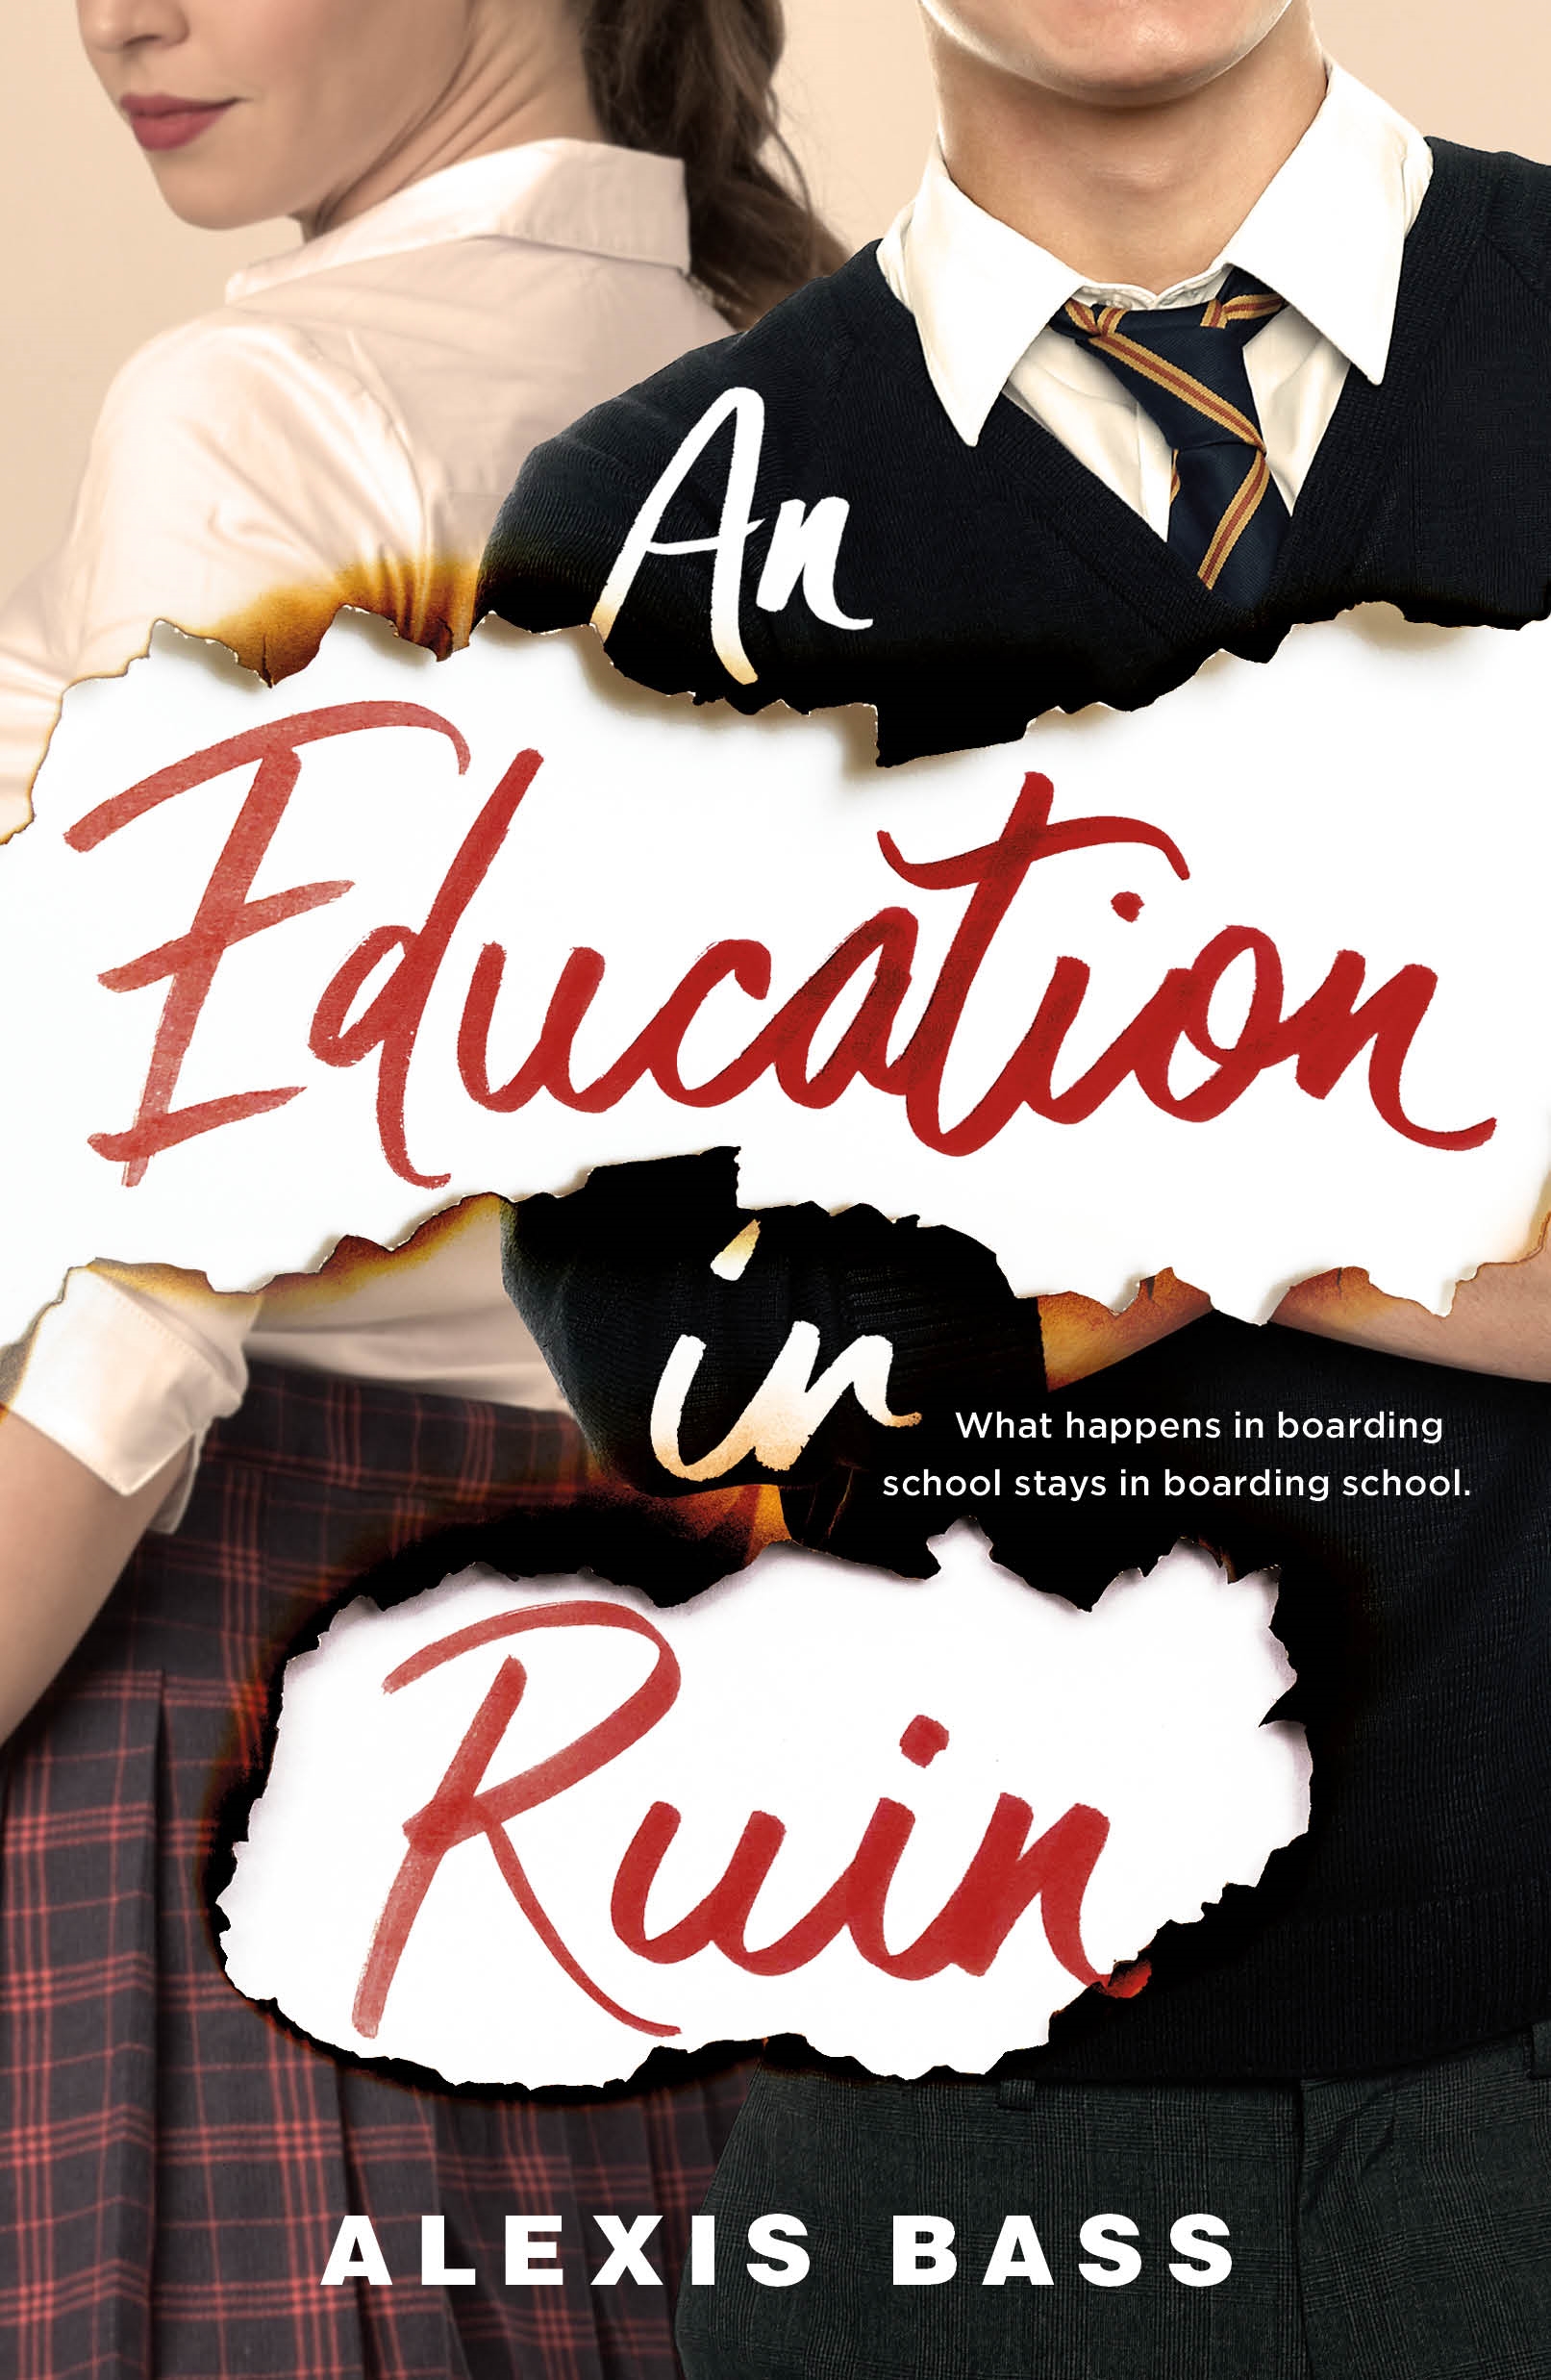 An Education in Ruin by Alexis Bass